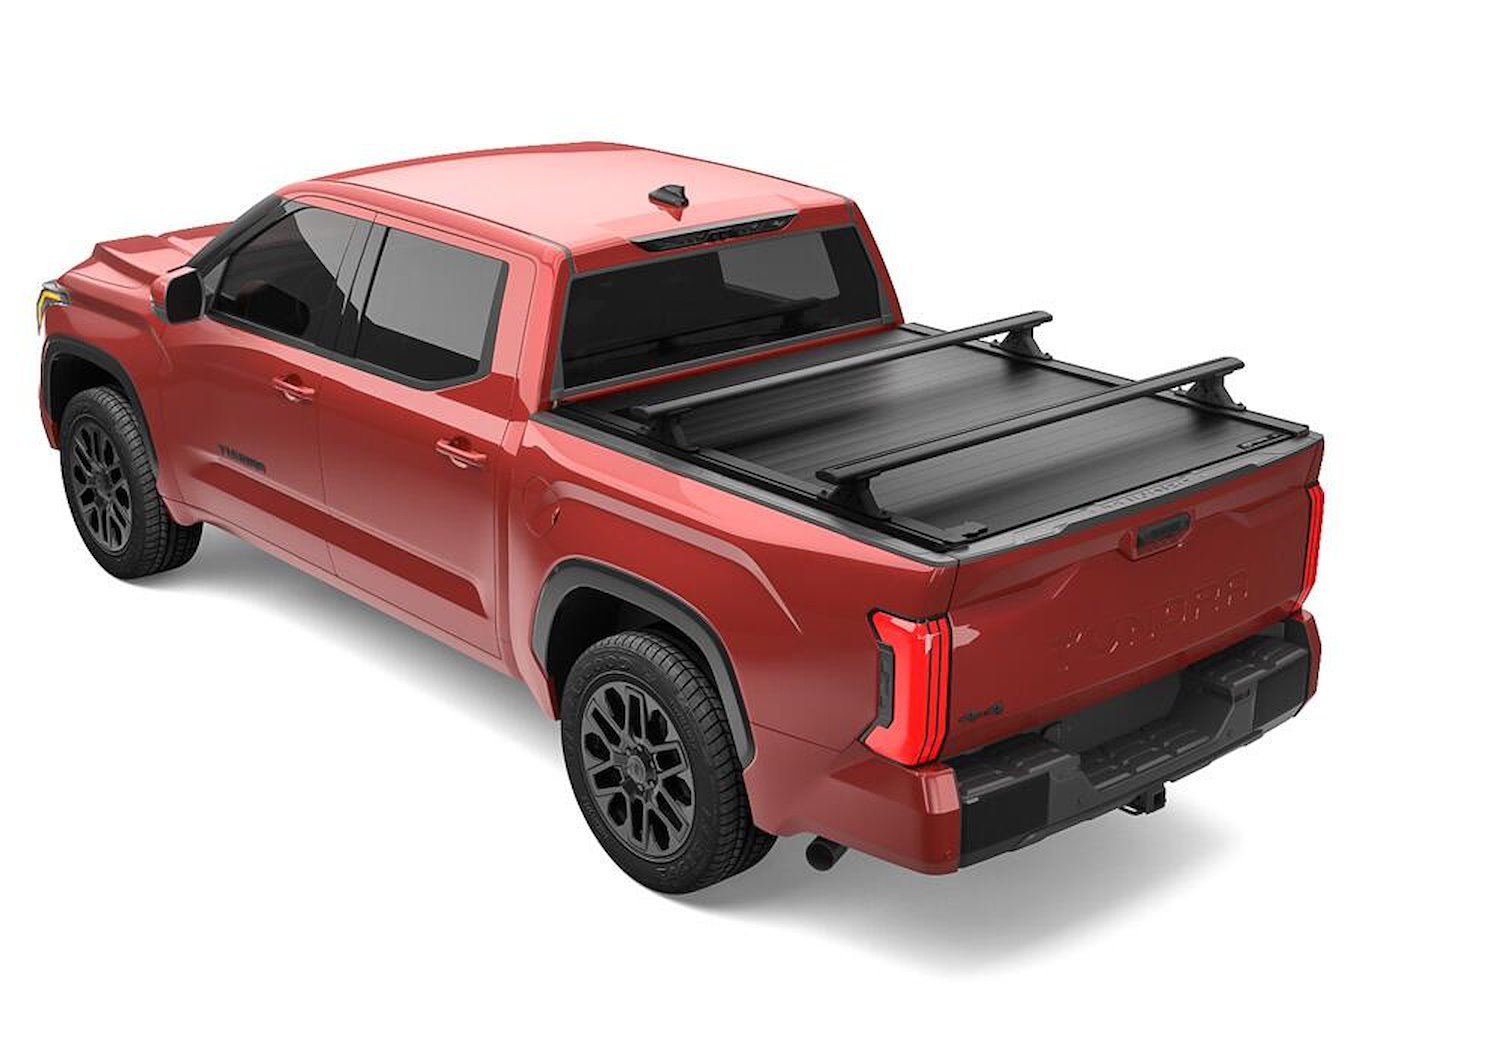 80861 RetraxPRO MX Retractable Tonneau Cover Fits Select Toyota Tundra CrewMax 5' 7" Bed with Deck Rail System